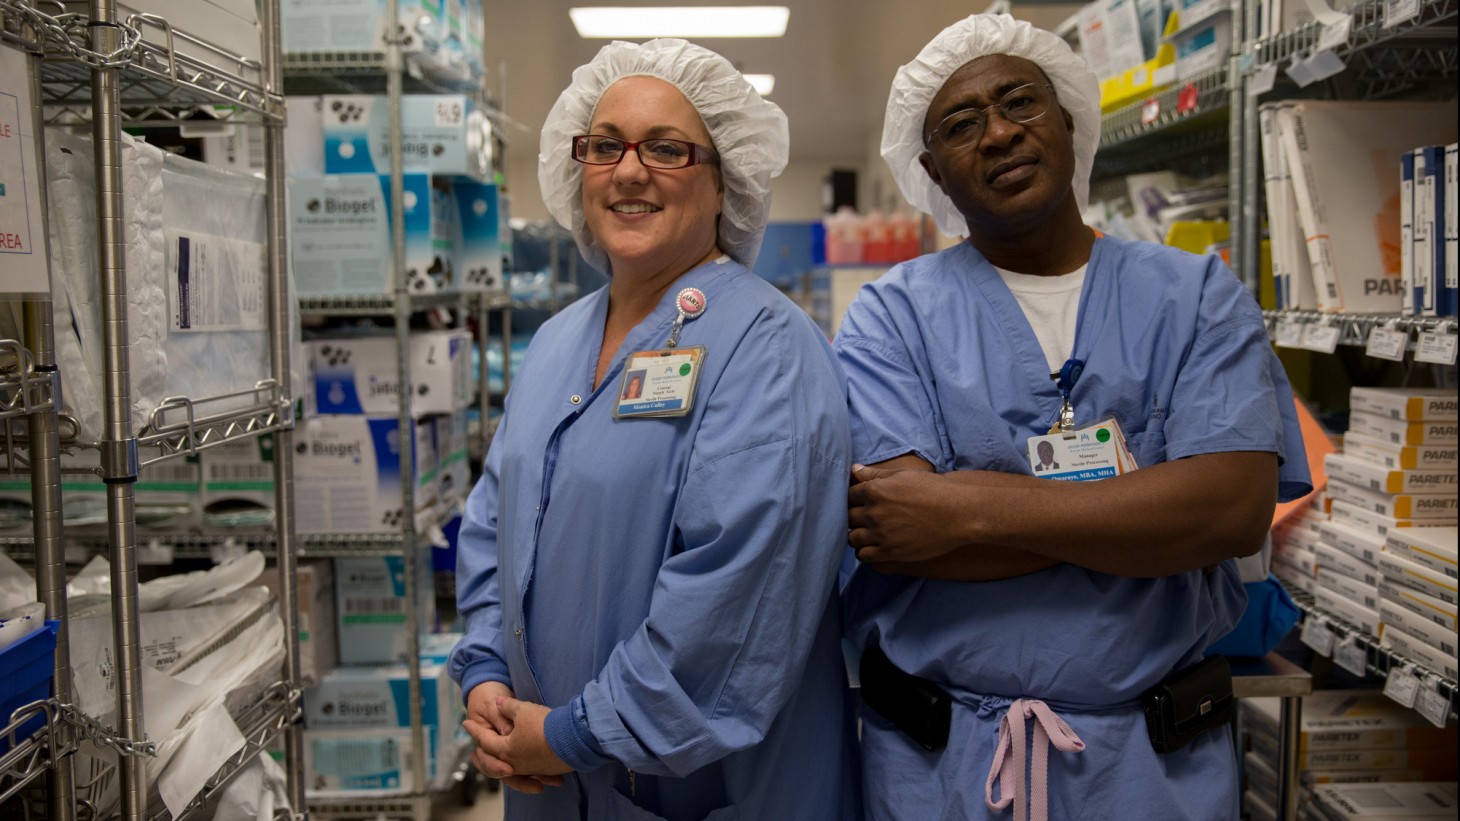 Two health care workers, wearing blue scrubs and white hair coverings, in a supply closet